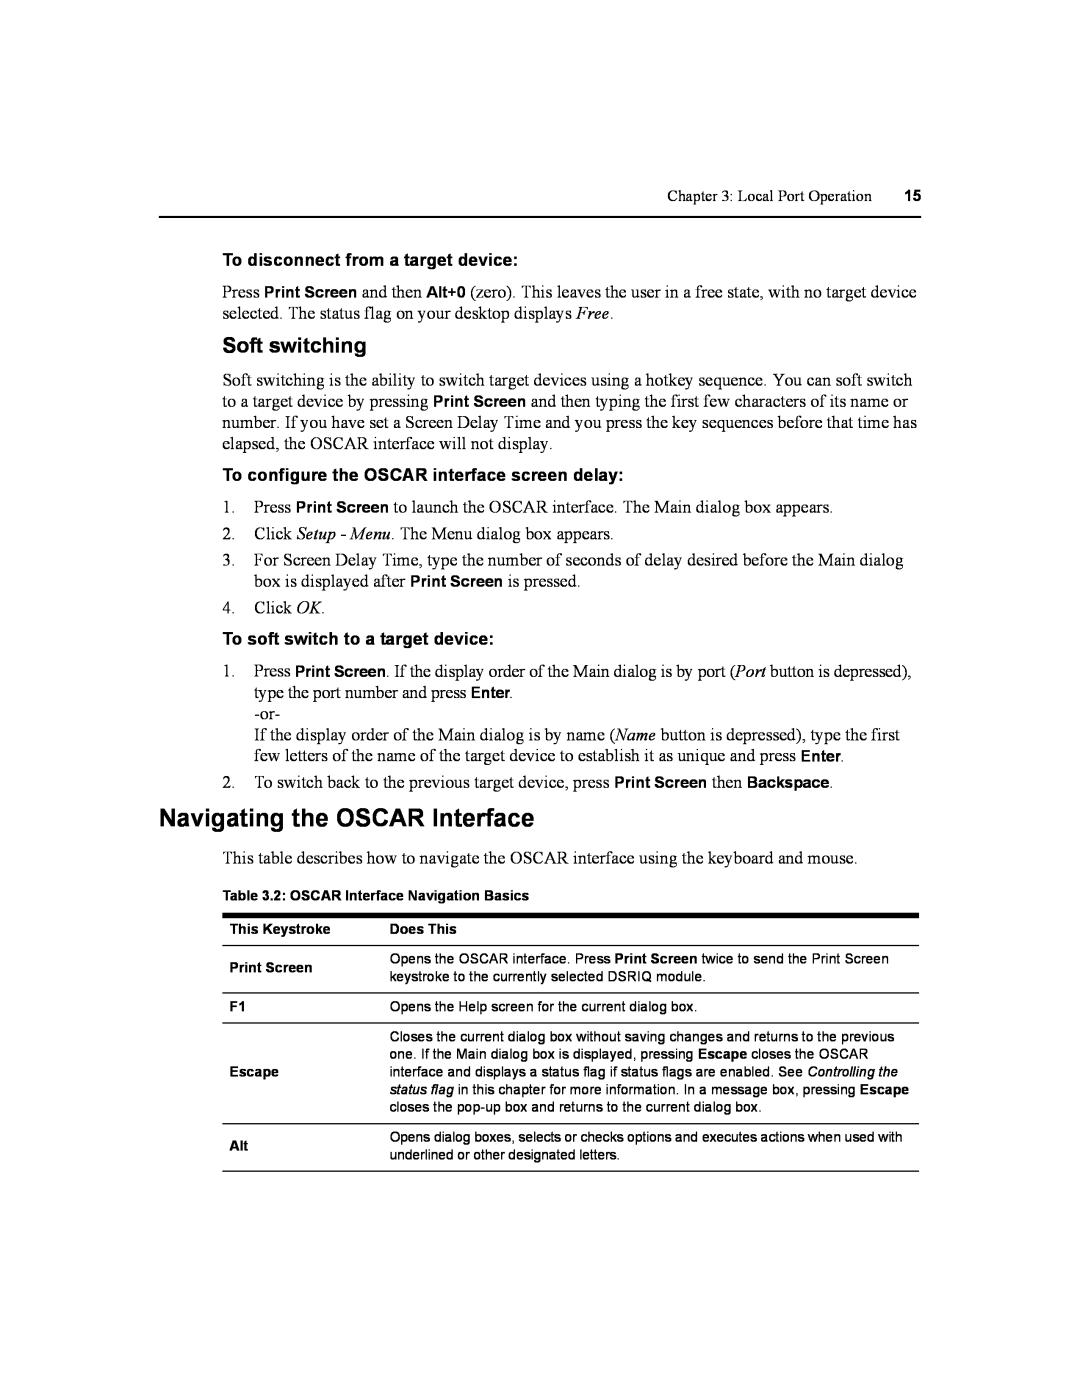 Daxten DSR1020, DSR2020, DSR4020, DSR8020 Navigating the OSCAR Interface, Soft switching, To disconnect from a target device 